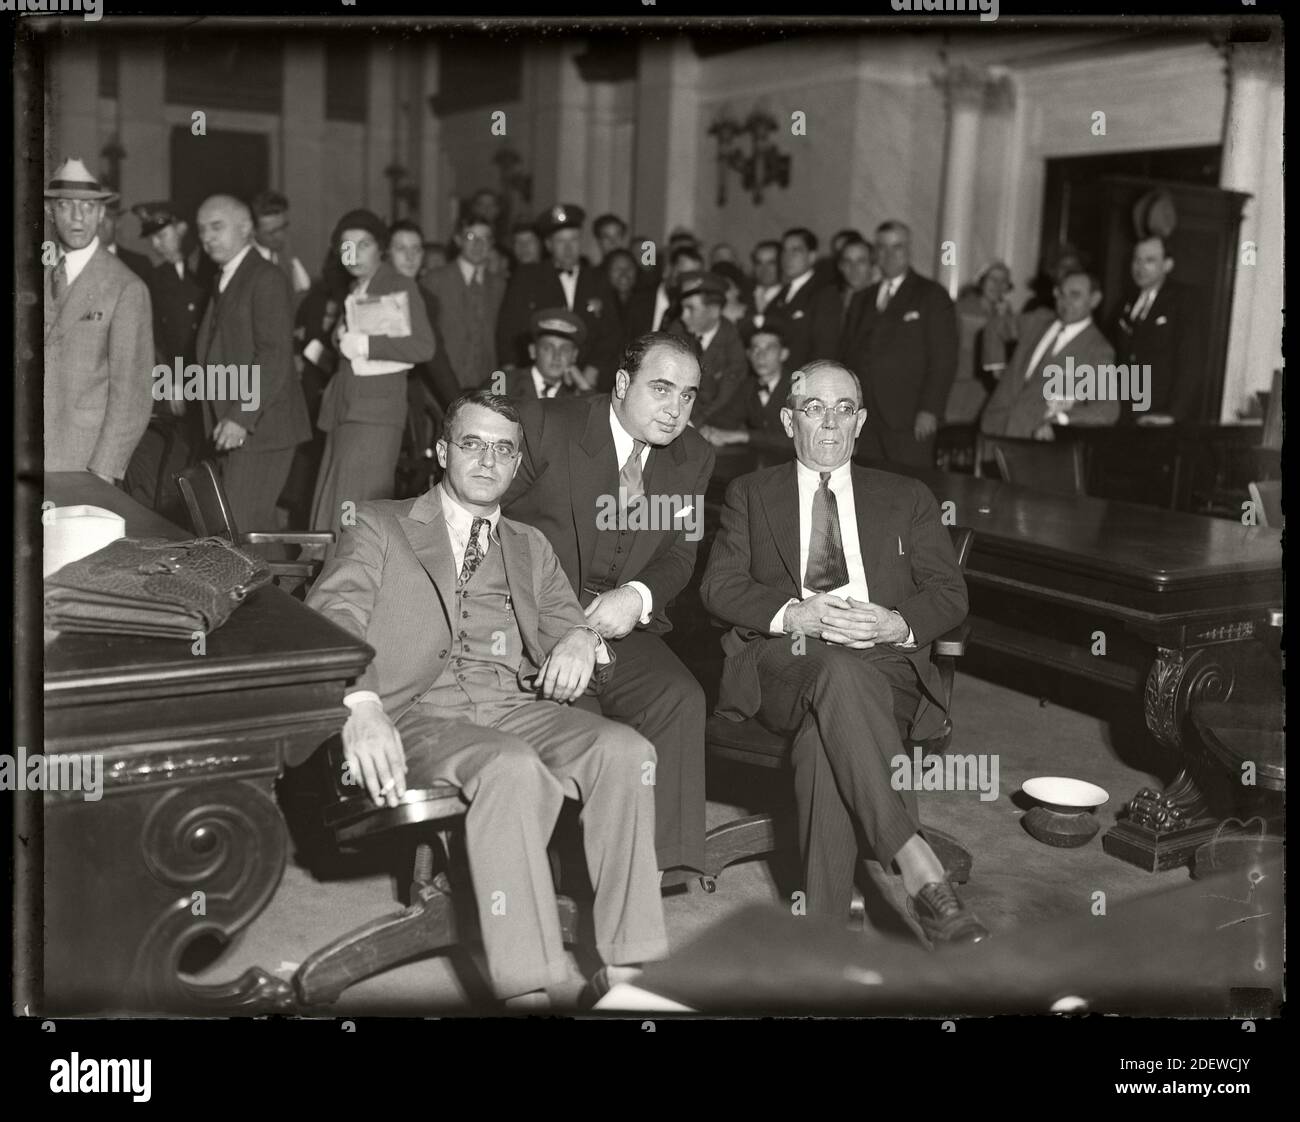 Al Capone sits in federal court during his tax evasion trial with his attorneys Michael Ahern, left, and Albert Fink, right. Chicago, Illinois,  October 7, 1931. Image from 4x5 inch glass negative. Stock Photo